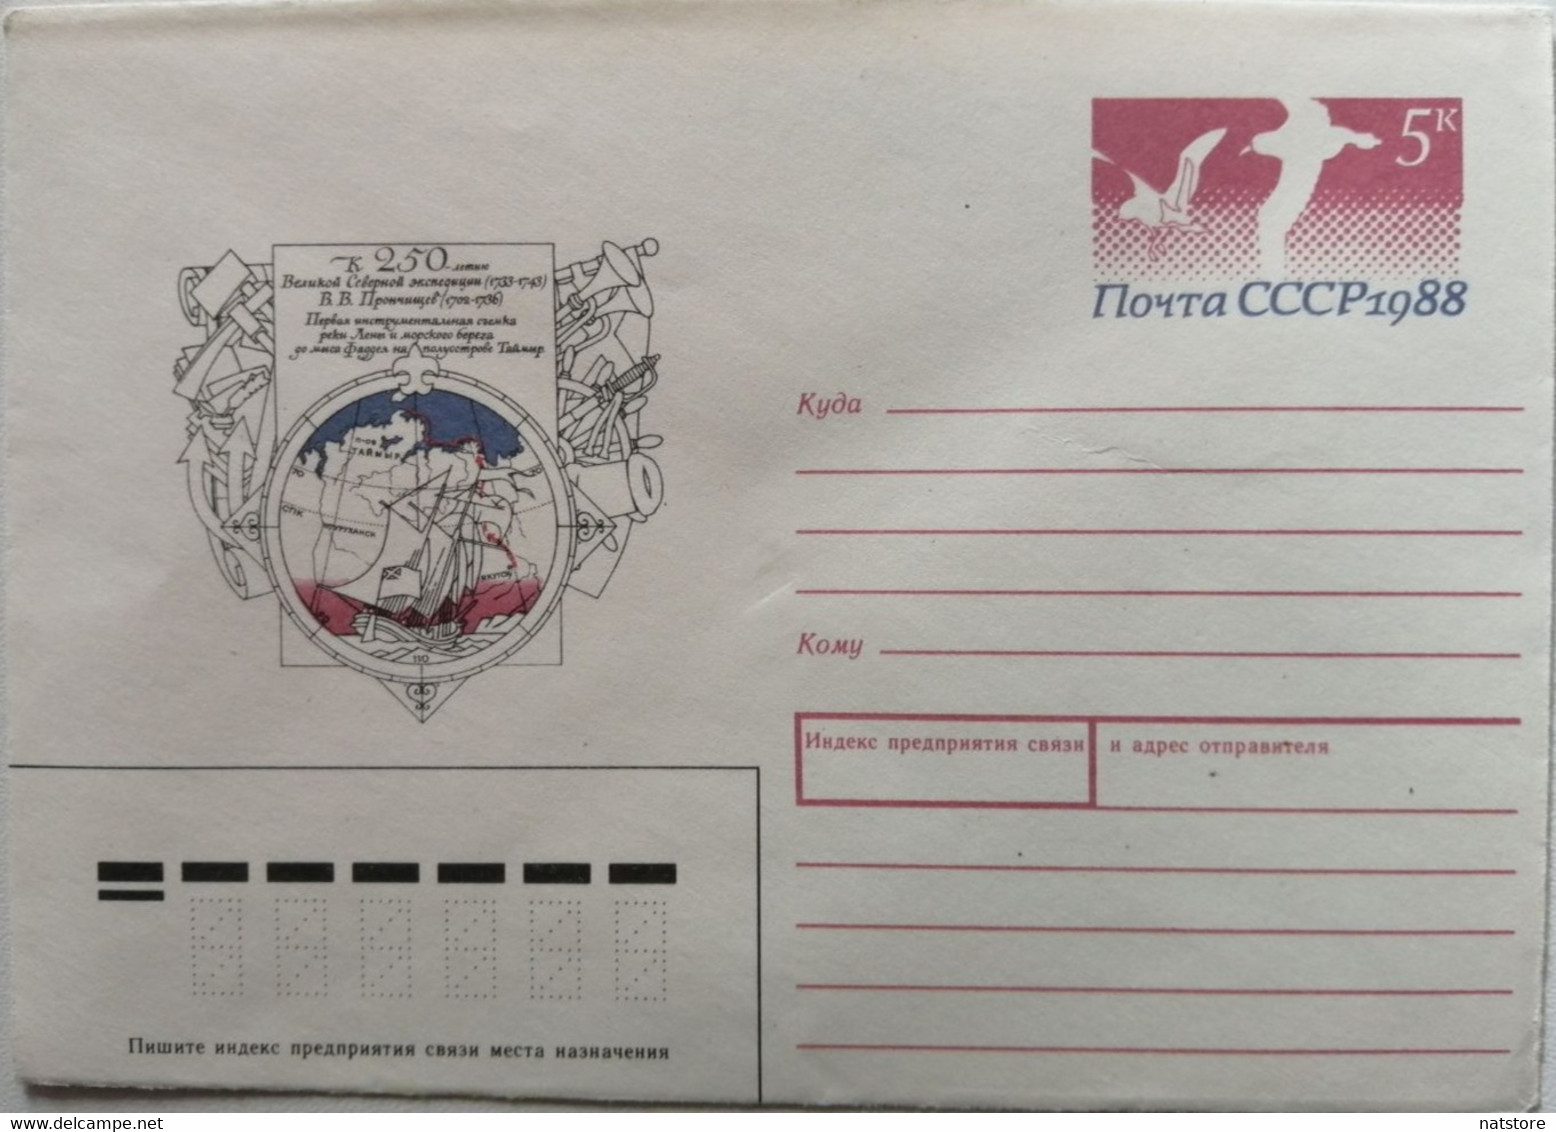 1989..USSR.COVER WITH STAMP..250 YEARS OF GREAT NORTH EXPEDITION..V.PRONCHISHEV... NEW!!! - Explorateurs & Célébrités Polaires